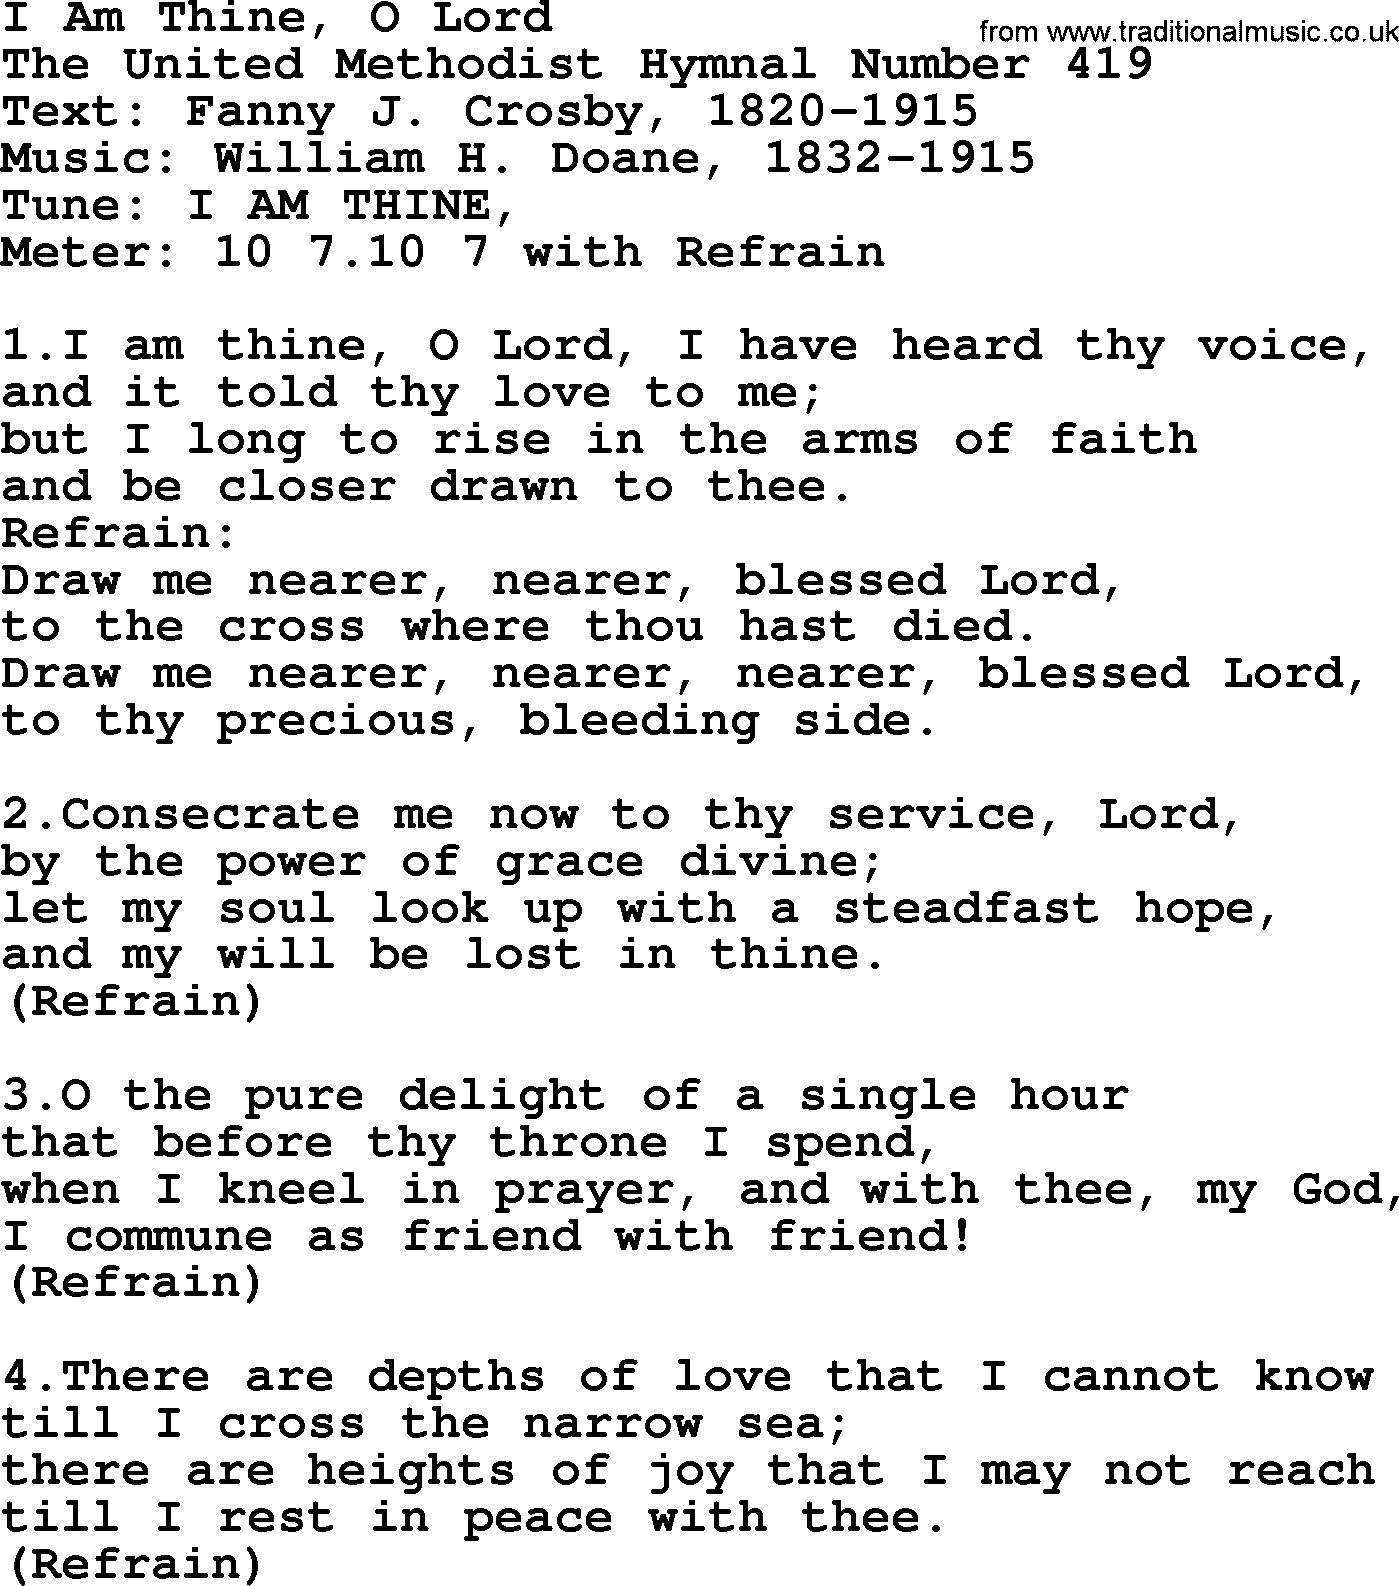 Ascensiontide Hynms collection, Hymn: I Am Thine, O Lord, lyrics and PDF